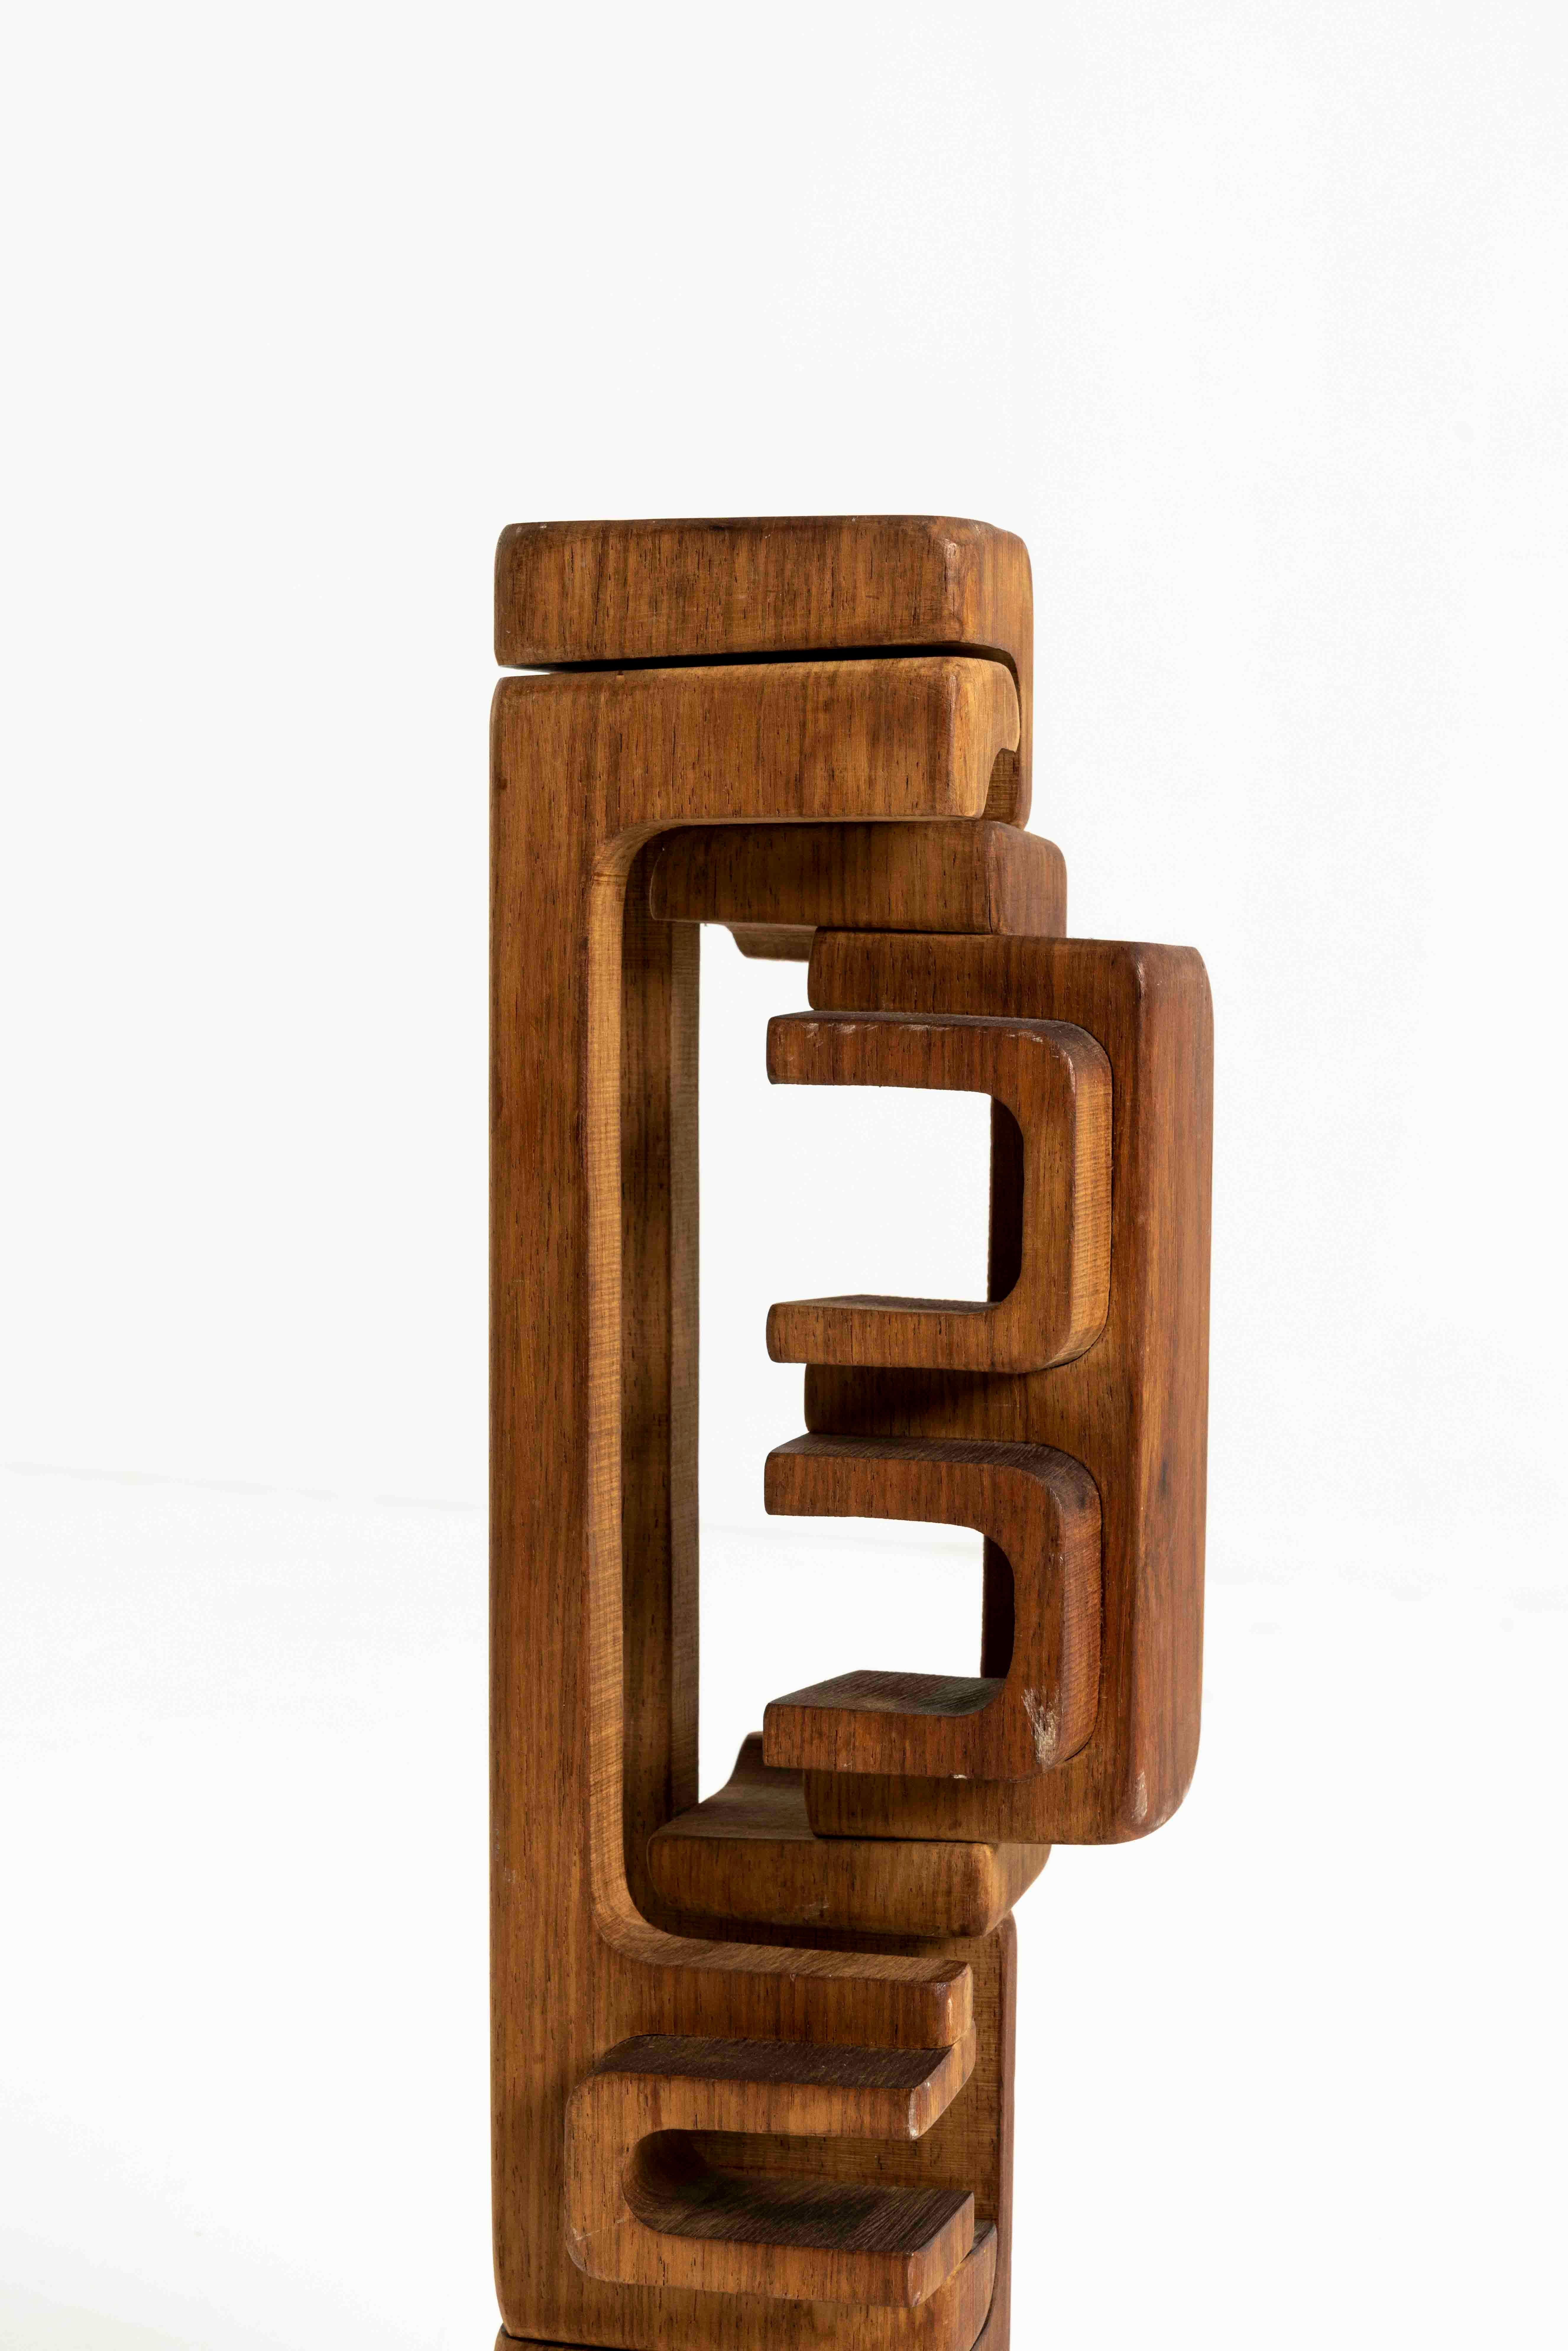 British Abstract Carved Wooden Sculpture by Brian Willsher, 1976 UK